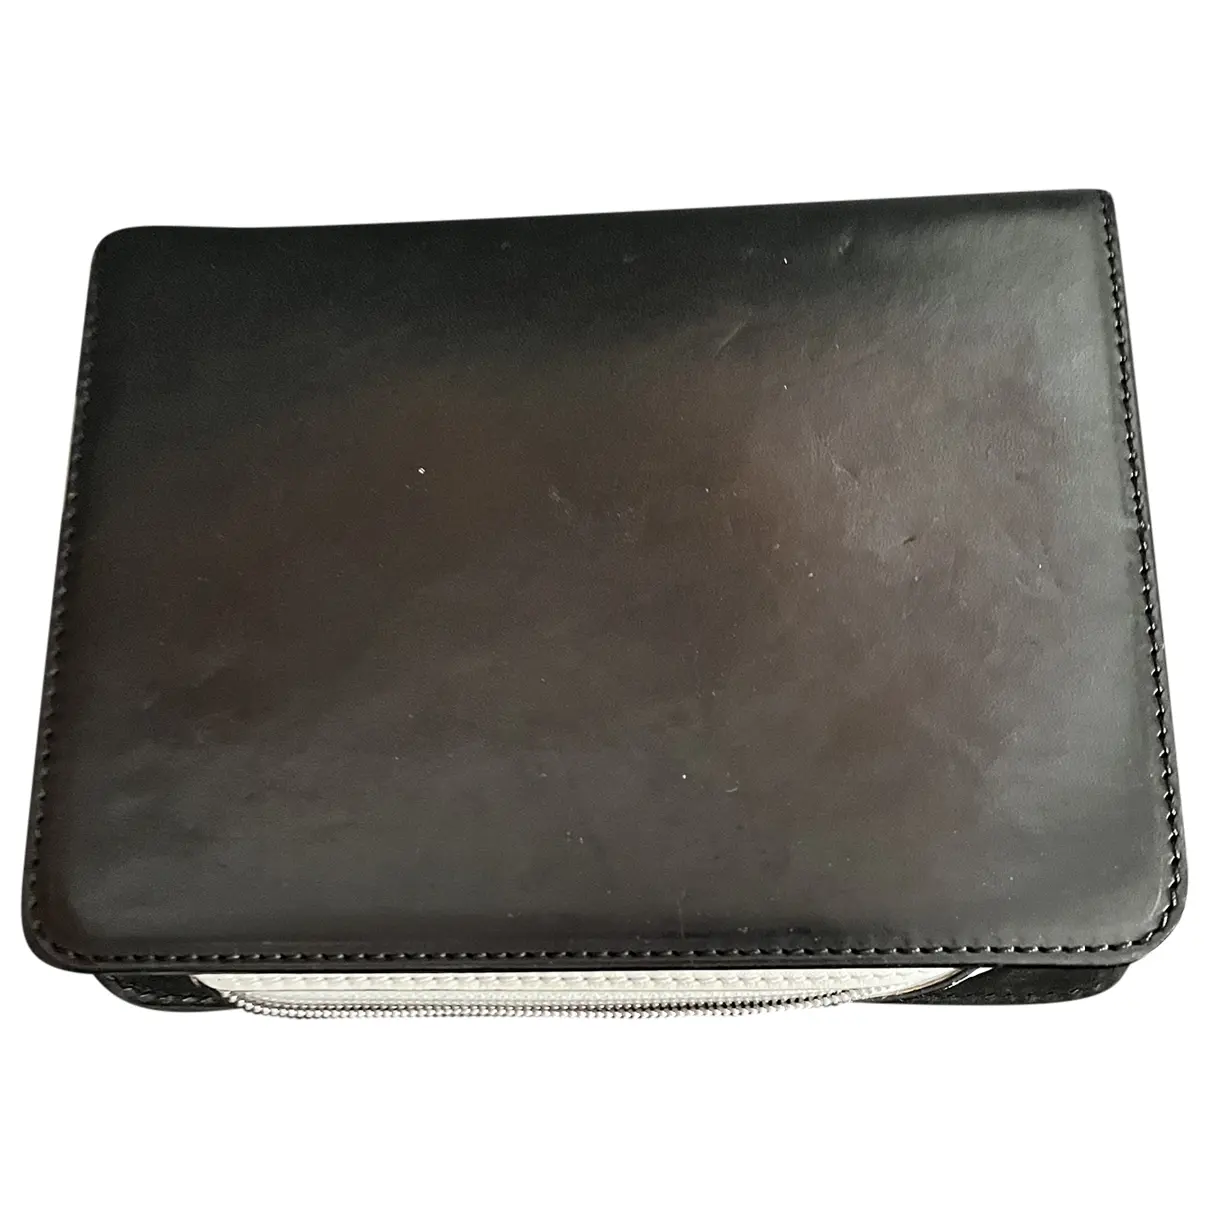 Patent leather clutch bag Ann Demeulemeester